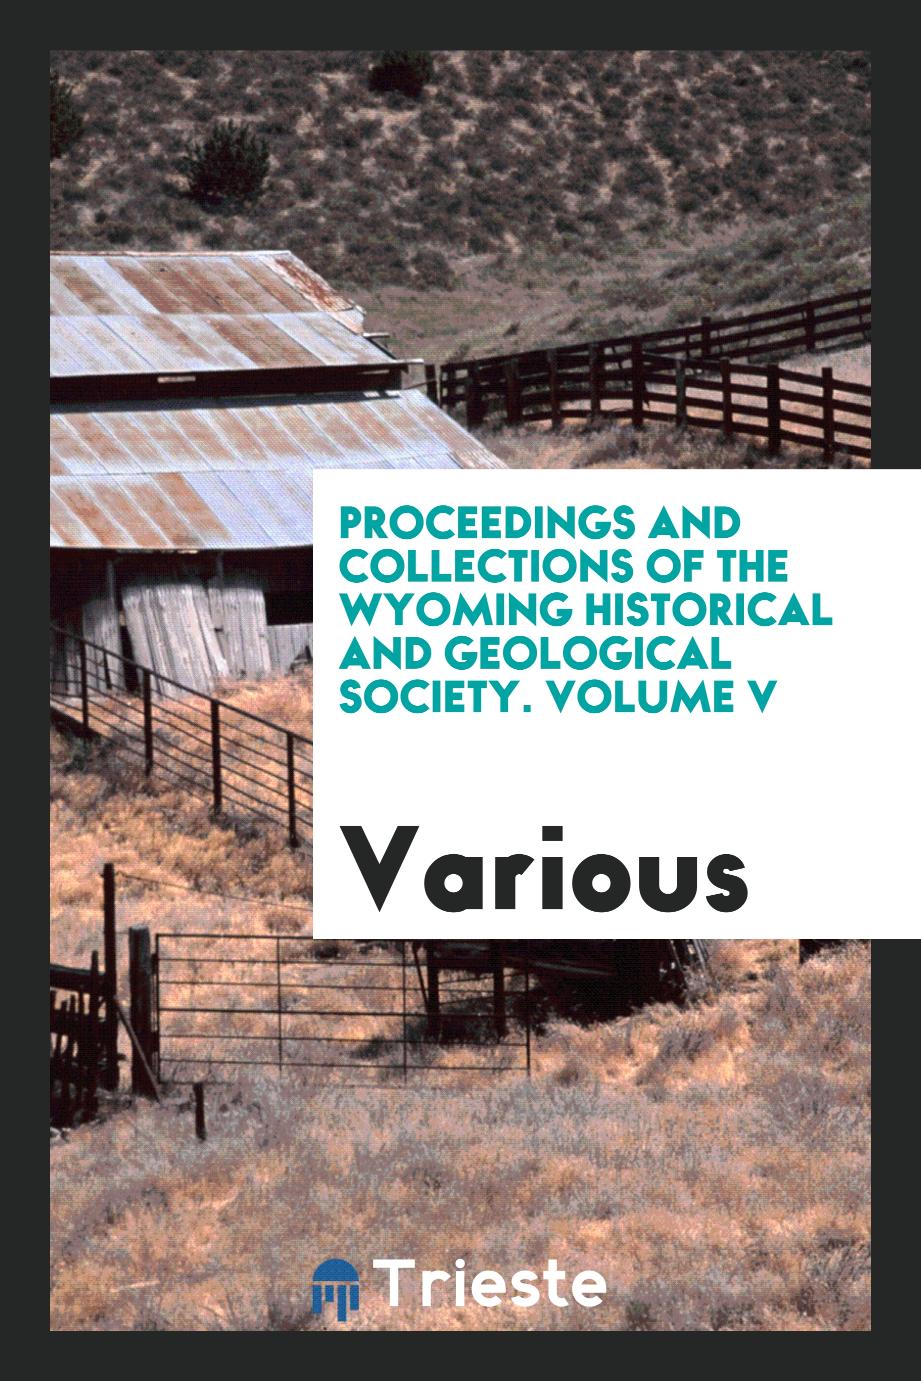 Proceedings and collections of the wyoming historical and geological society. Volume V